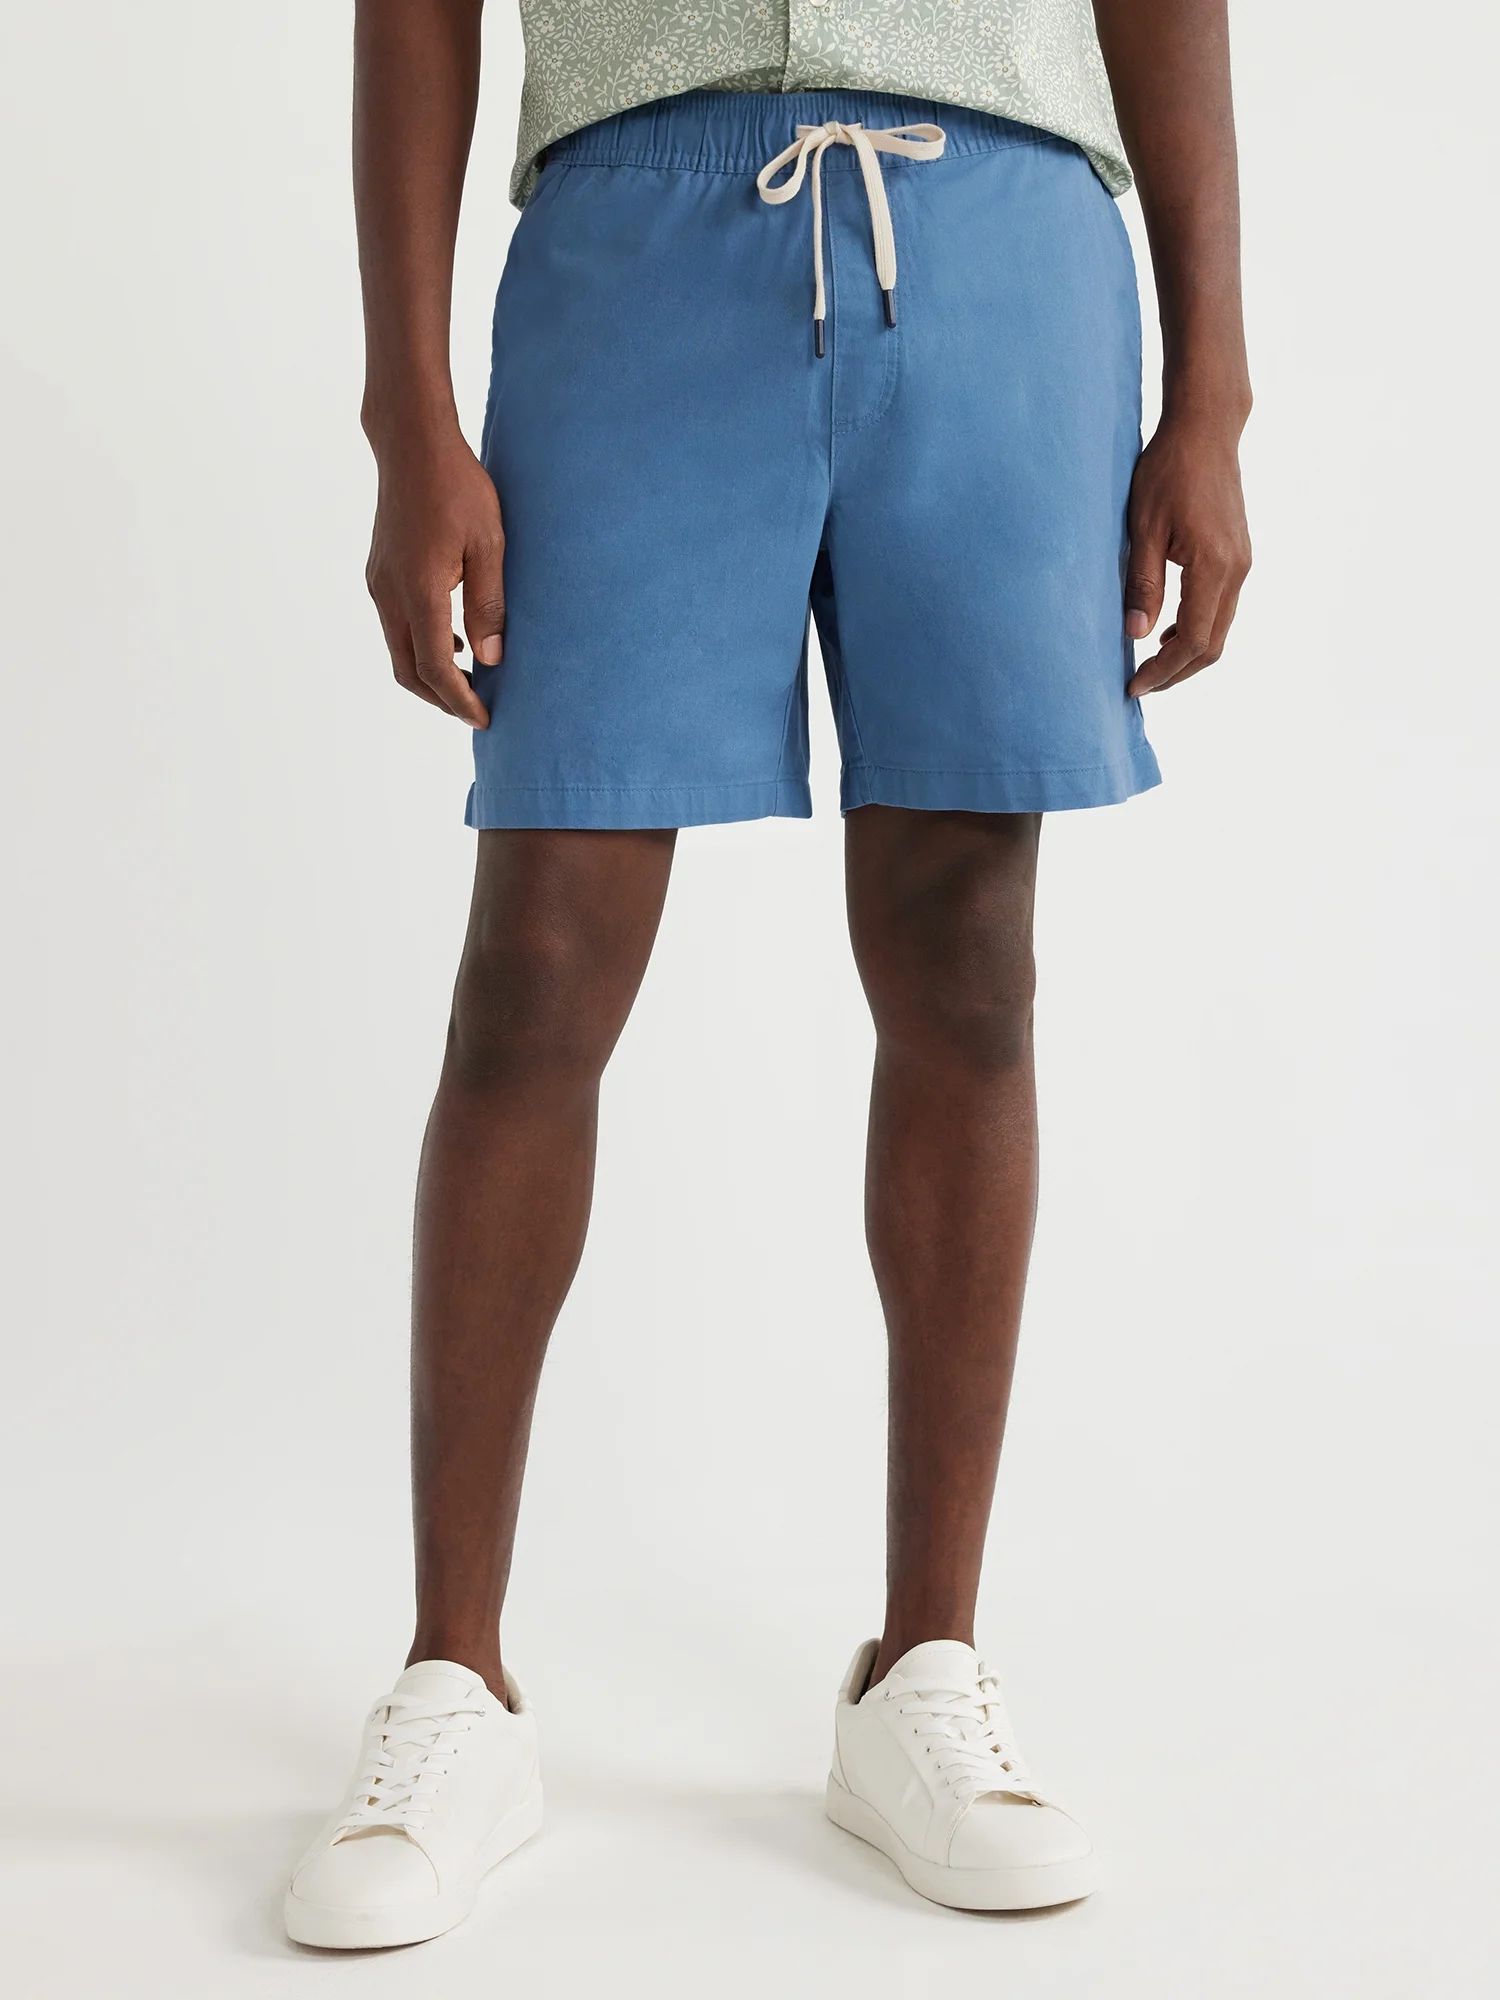 Free Assembly Men's Pull On Shorts with Drawstring, Sizes S-3XL | Walmart (US)